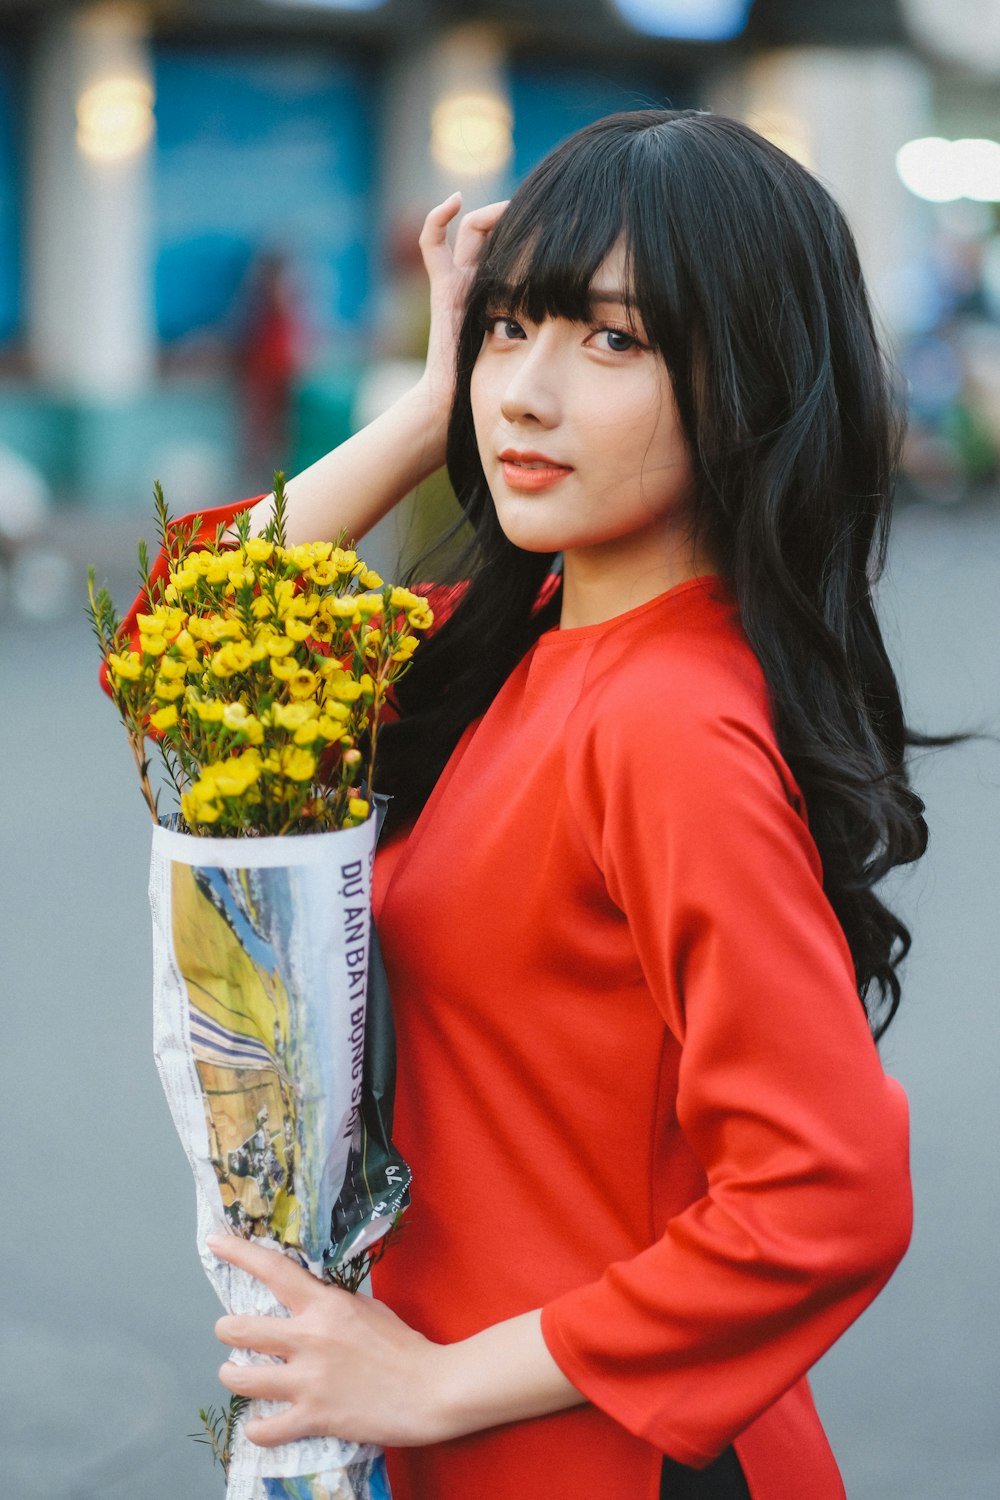 a woman in a red dress holding a bouquet of flowers